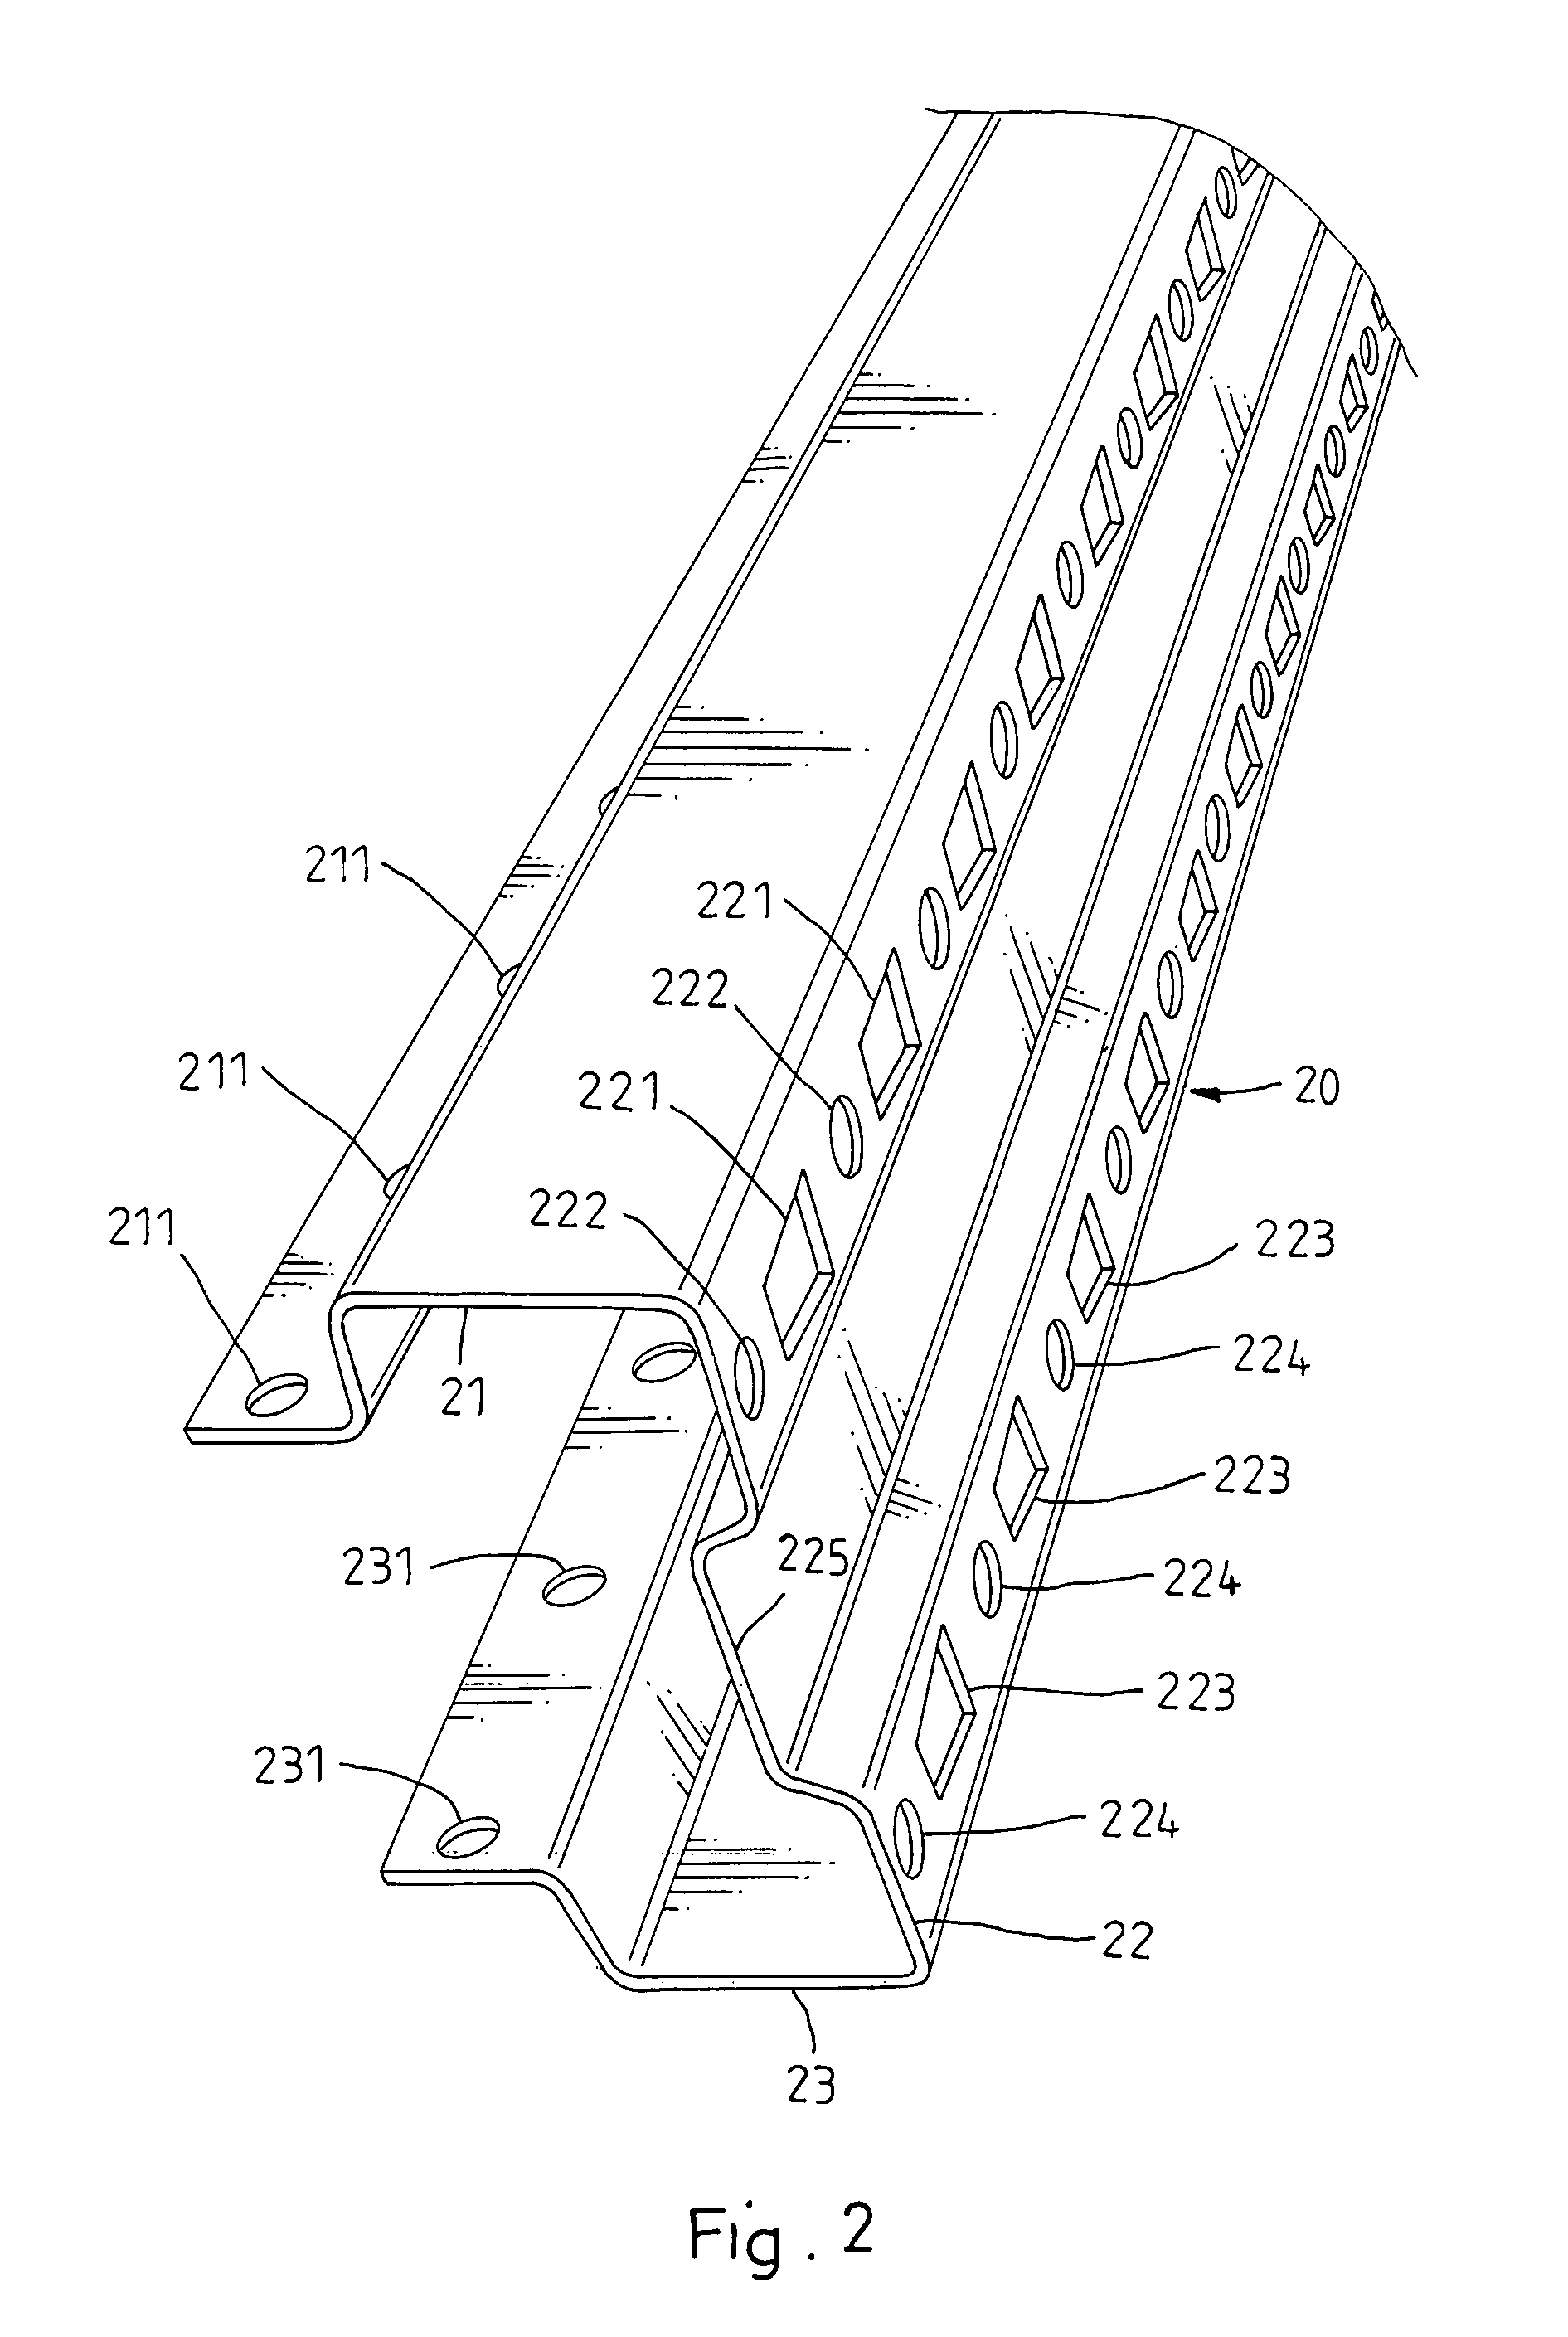 Main beam fabrication procedure and system for making a main beam for warehouse framework